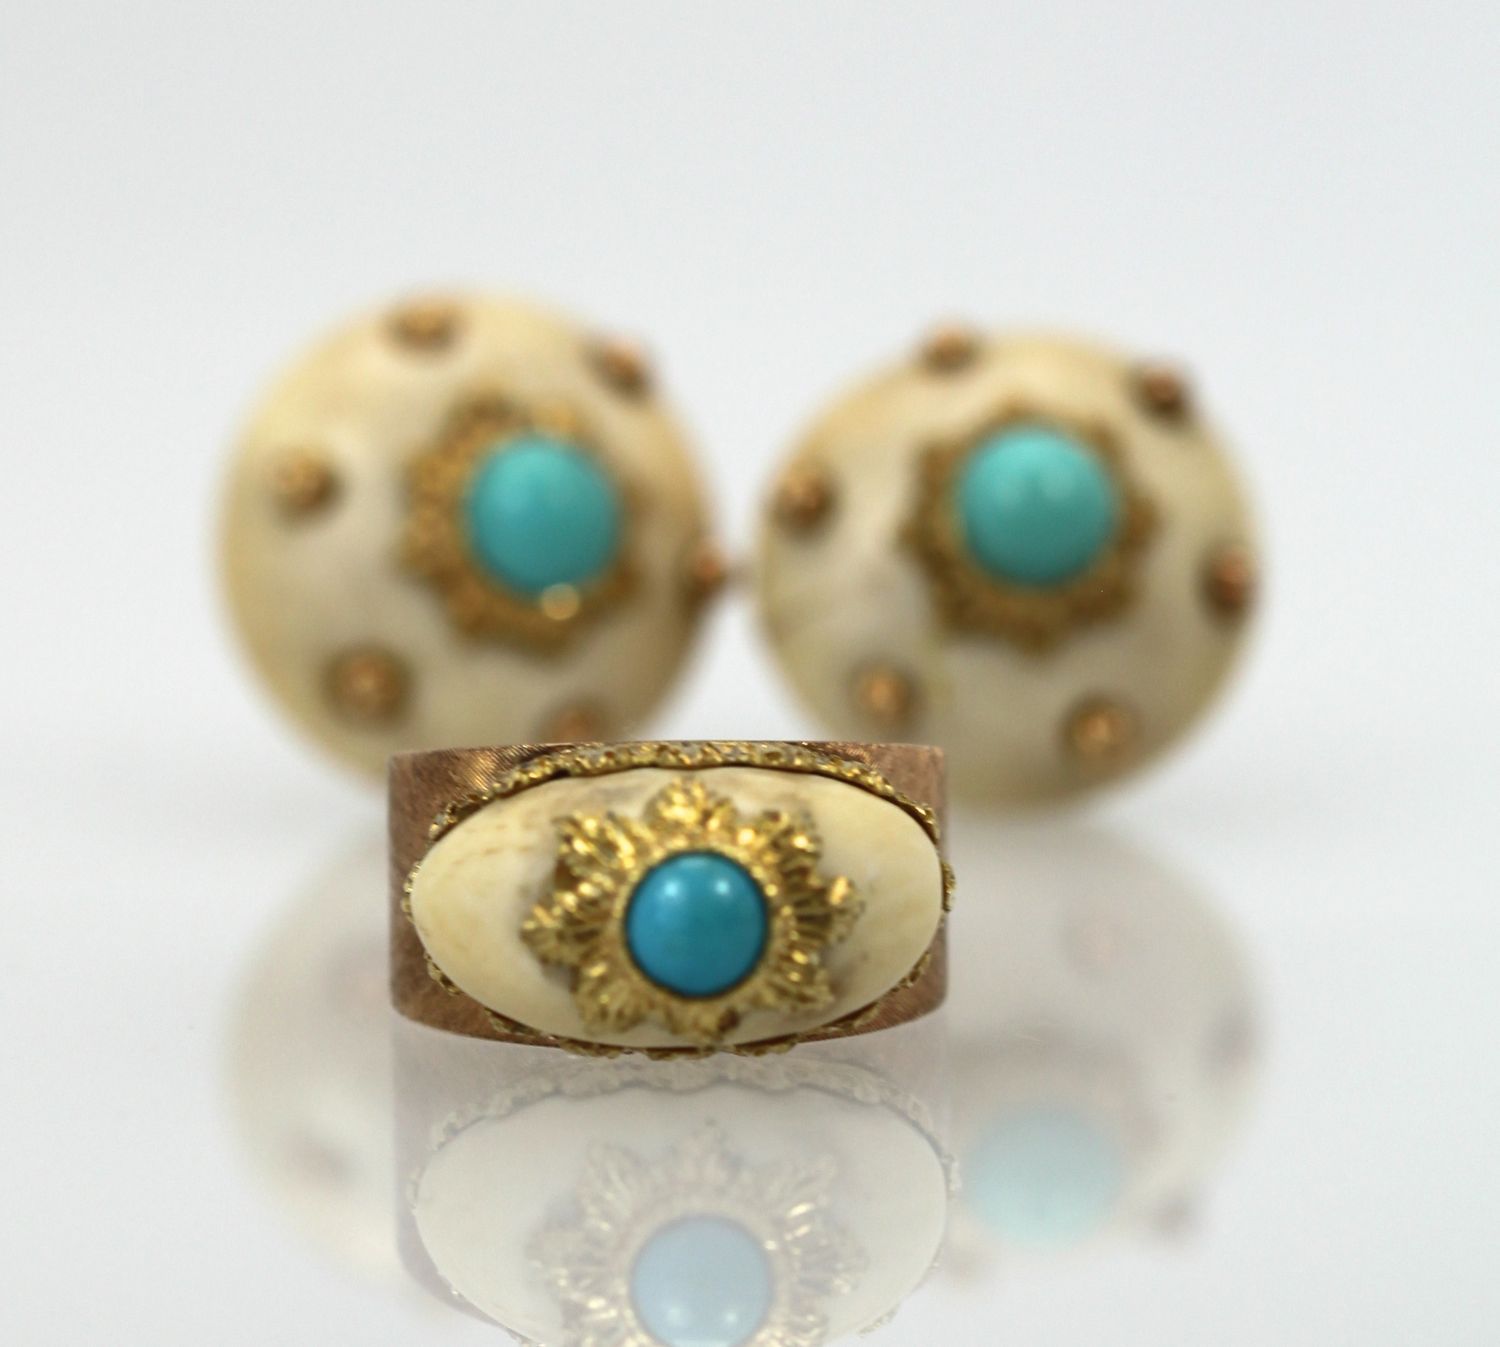 Buccellati 18K Brushed Yellow Gold & Turquoise Ring earrings in background